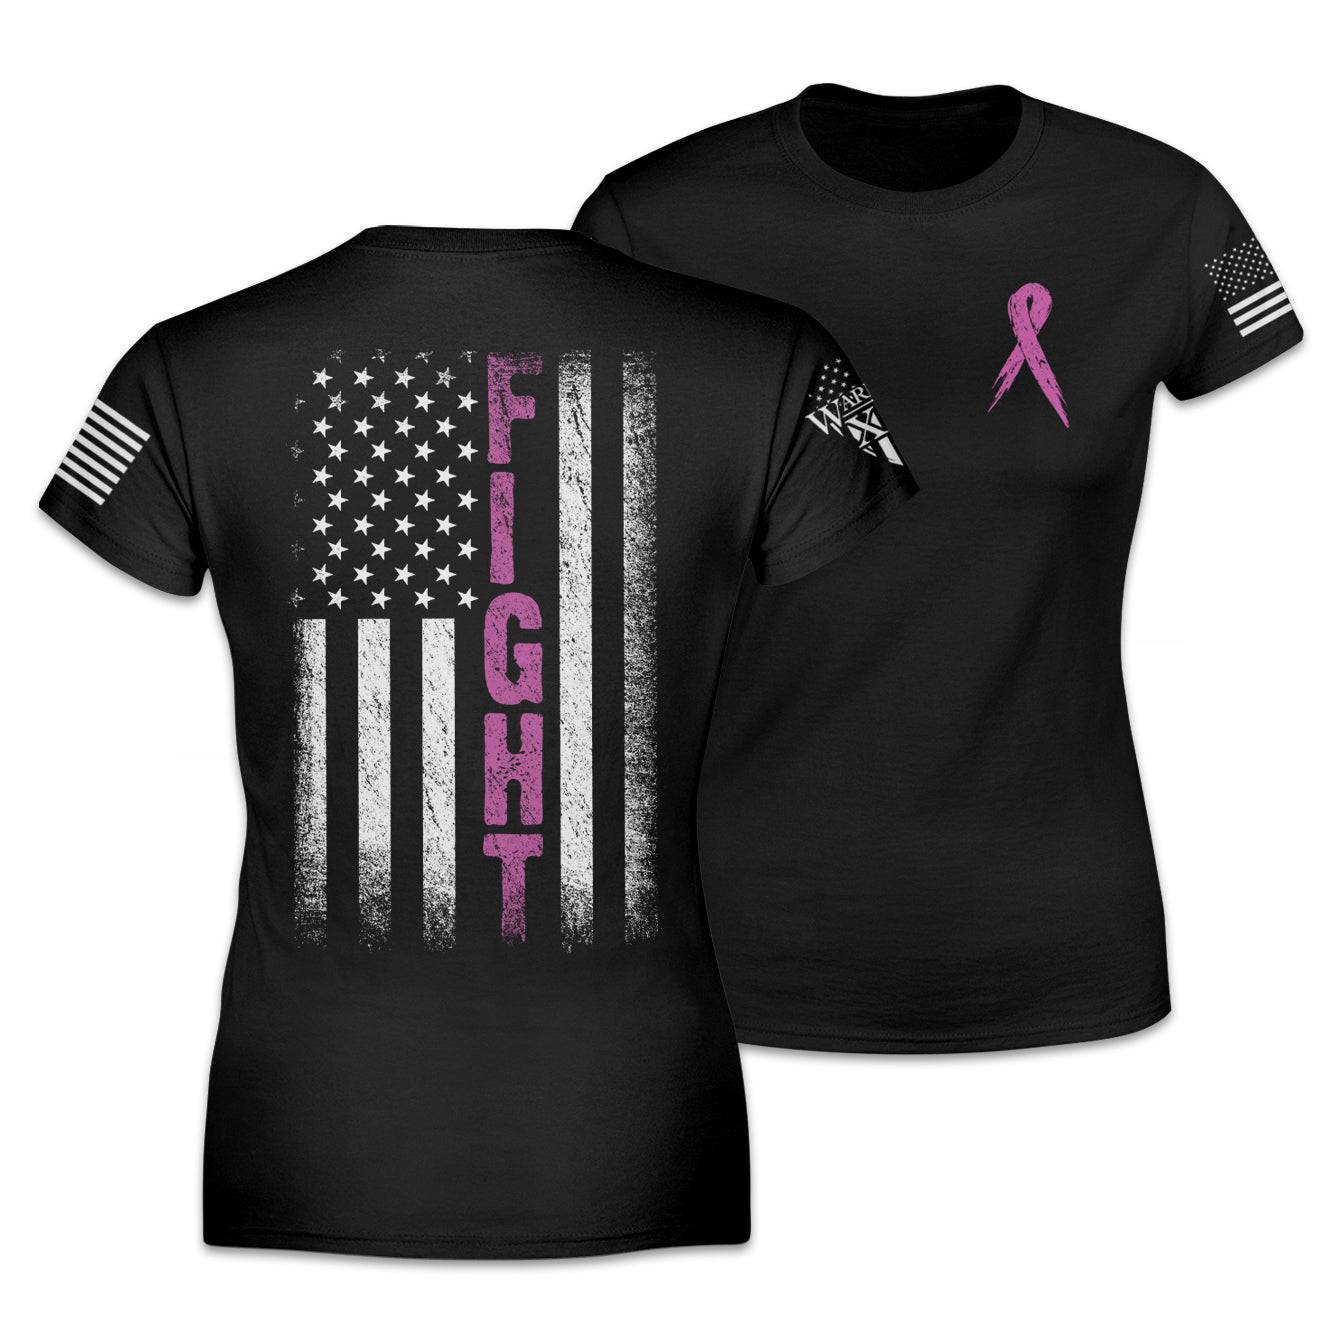 Front & back women's black t-shirt with the words "Fight" within an American flag printed on the back of the shirt for breast cancer awareness Women's Shirt.